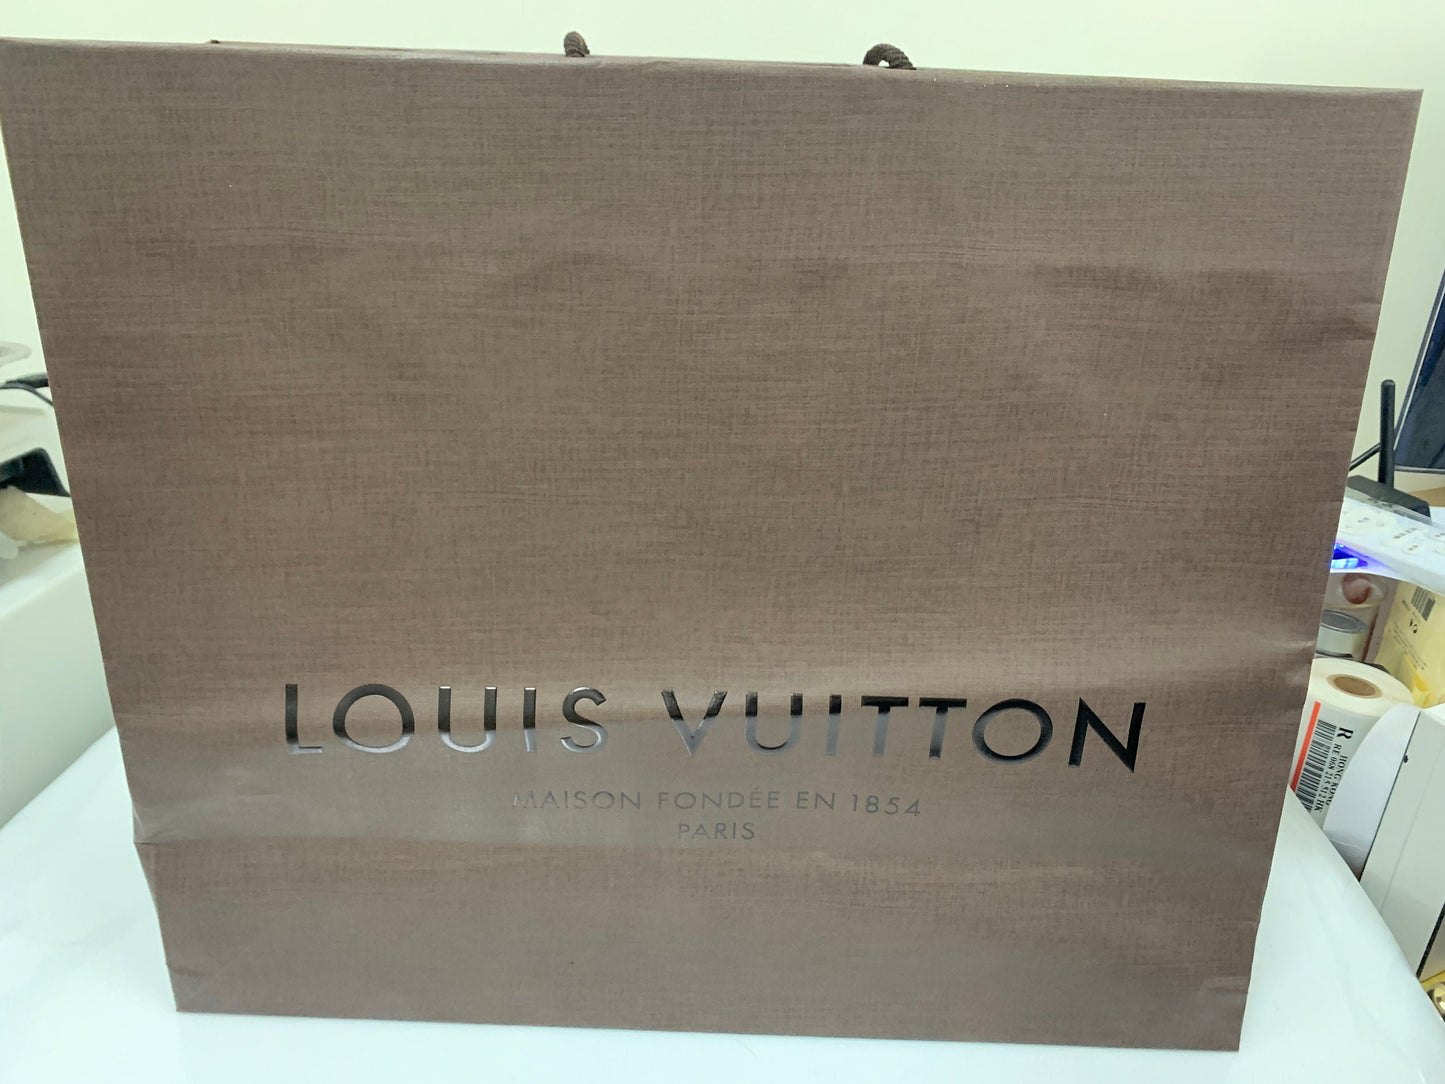 Authentic Louis Vuitton Vintage Paper Box Preowned Good Conditions Large Size handbag and large bag